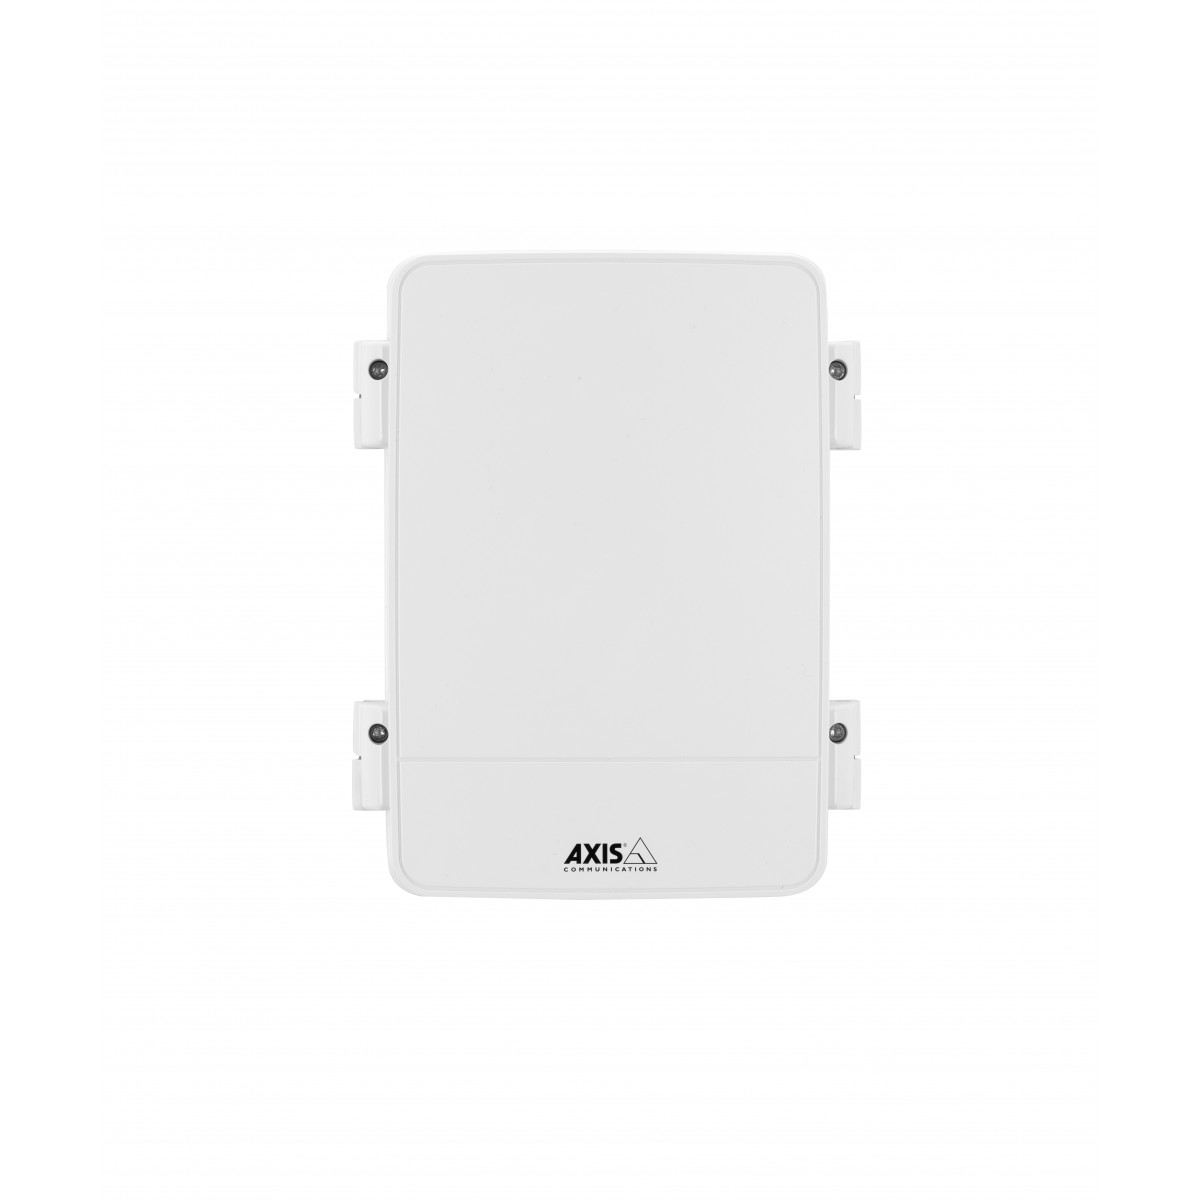 Axis T98A15-VE - Housing  mount - Outdoor - Stainless steel - White - Stainless steel - IEC 60529 IP66 - NEMA 250 rating Type 4X